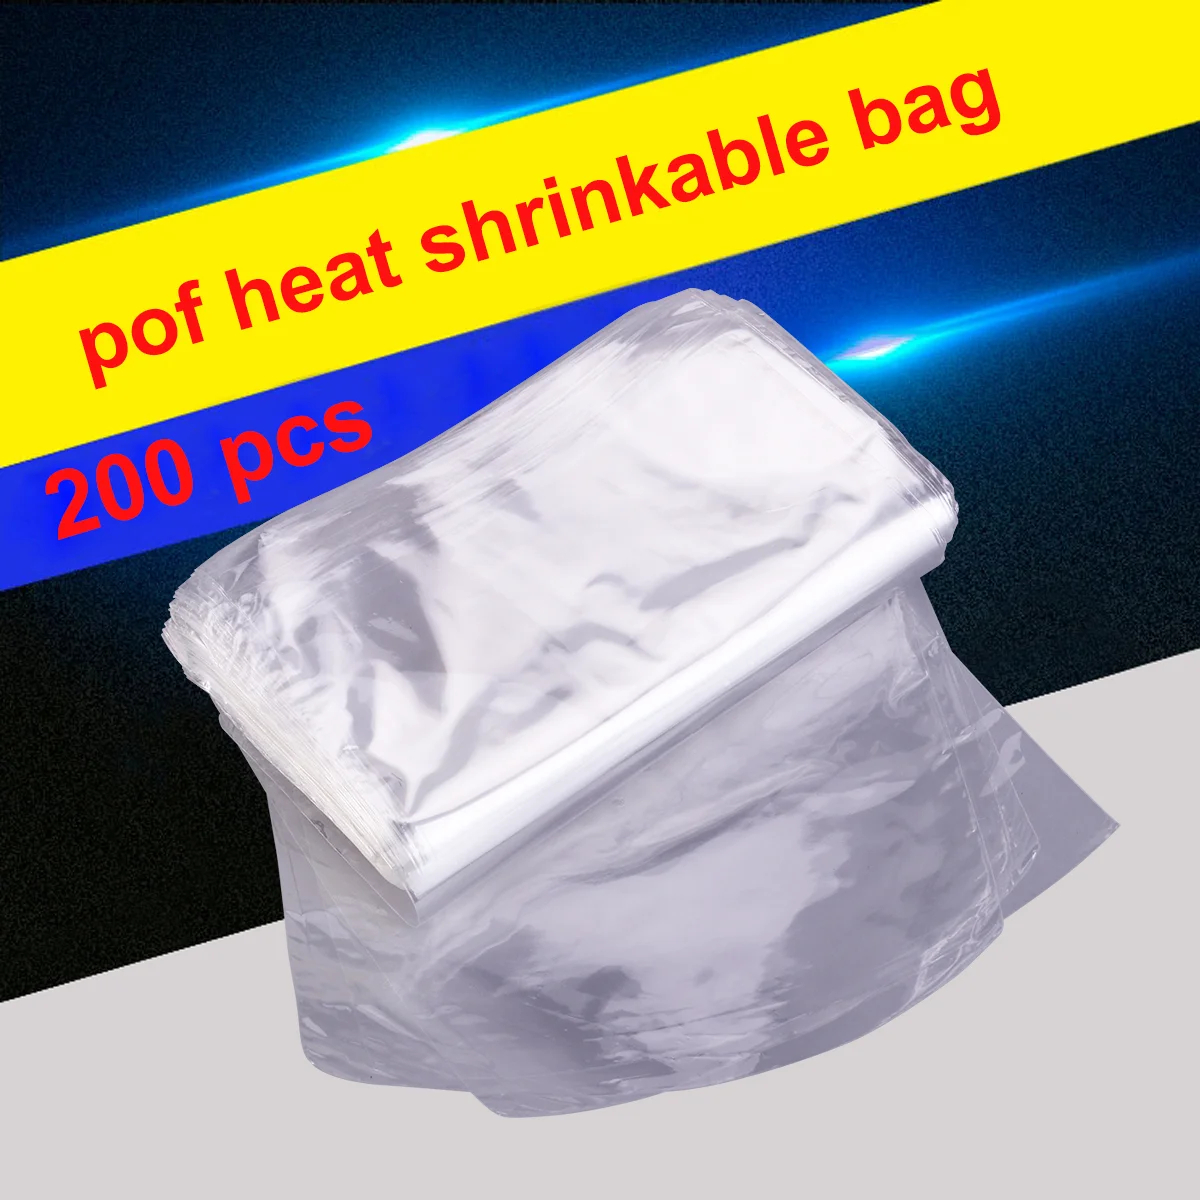 Shrink Wrap Bags, 200 6x6 Inches Waterproof POF Heat Shrink Wrap for Packagaing, Bath,, Small Gifts, Jars and Homemade DIY